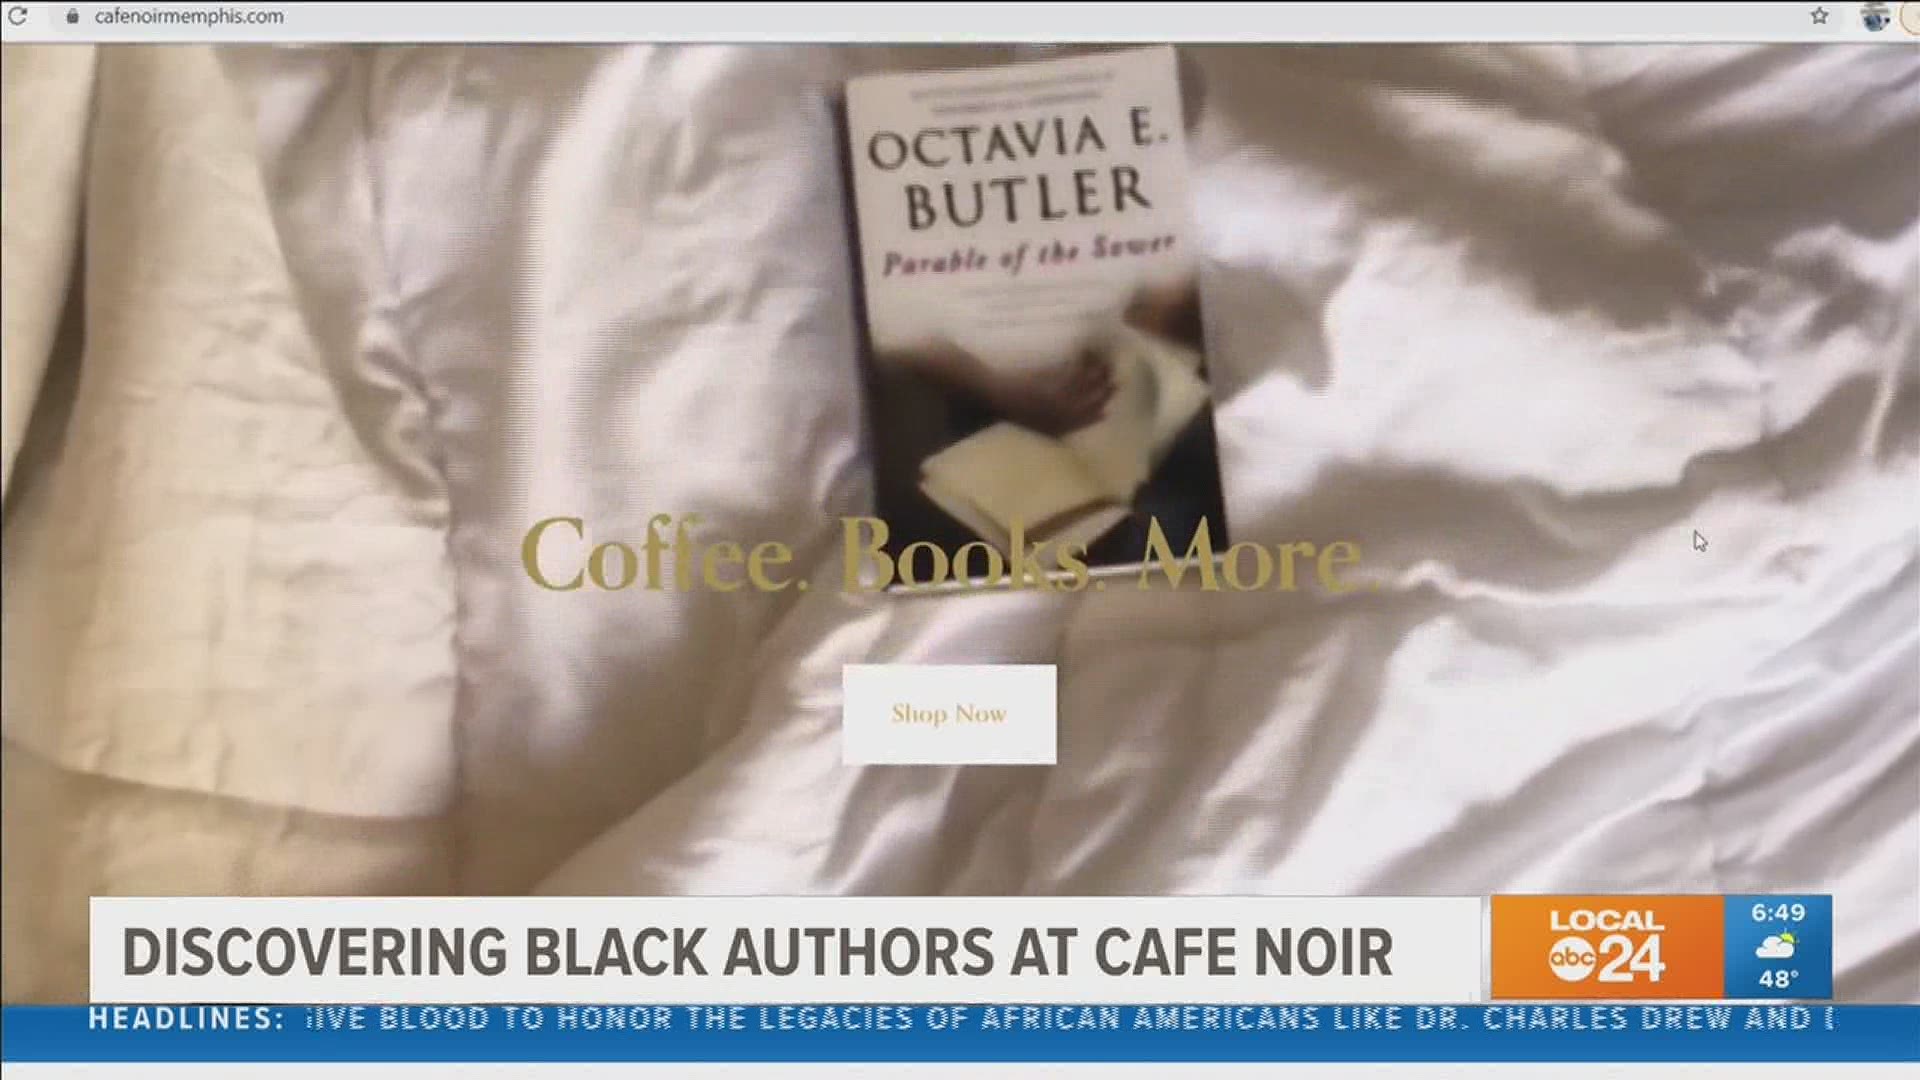 Cafe Noir is an online book store that sells books by  Black, PoC and LGBTQ+ authors